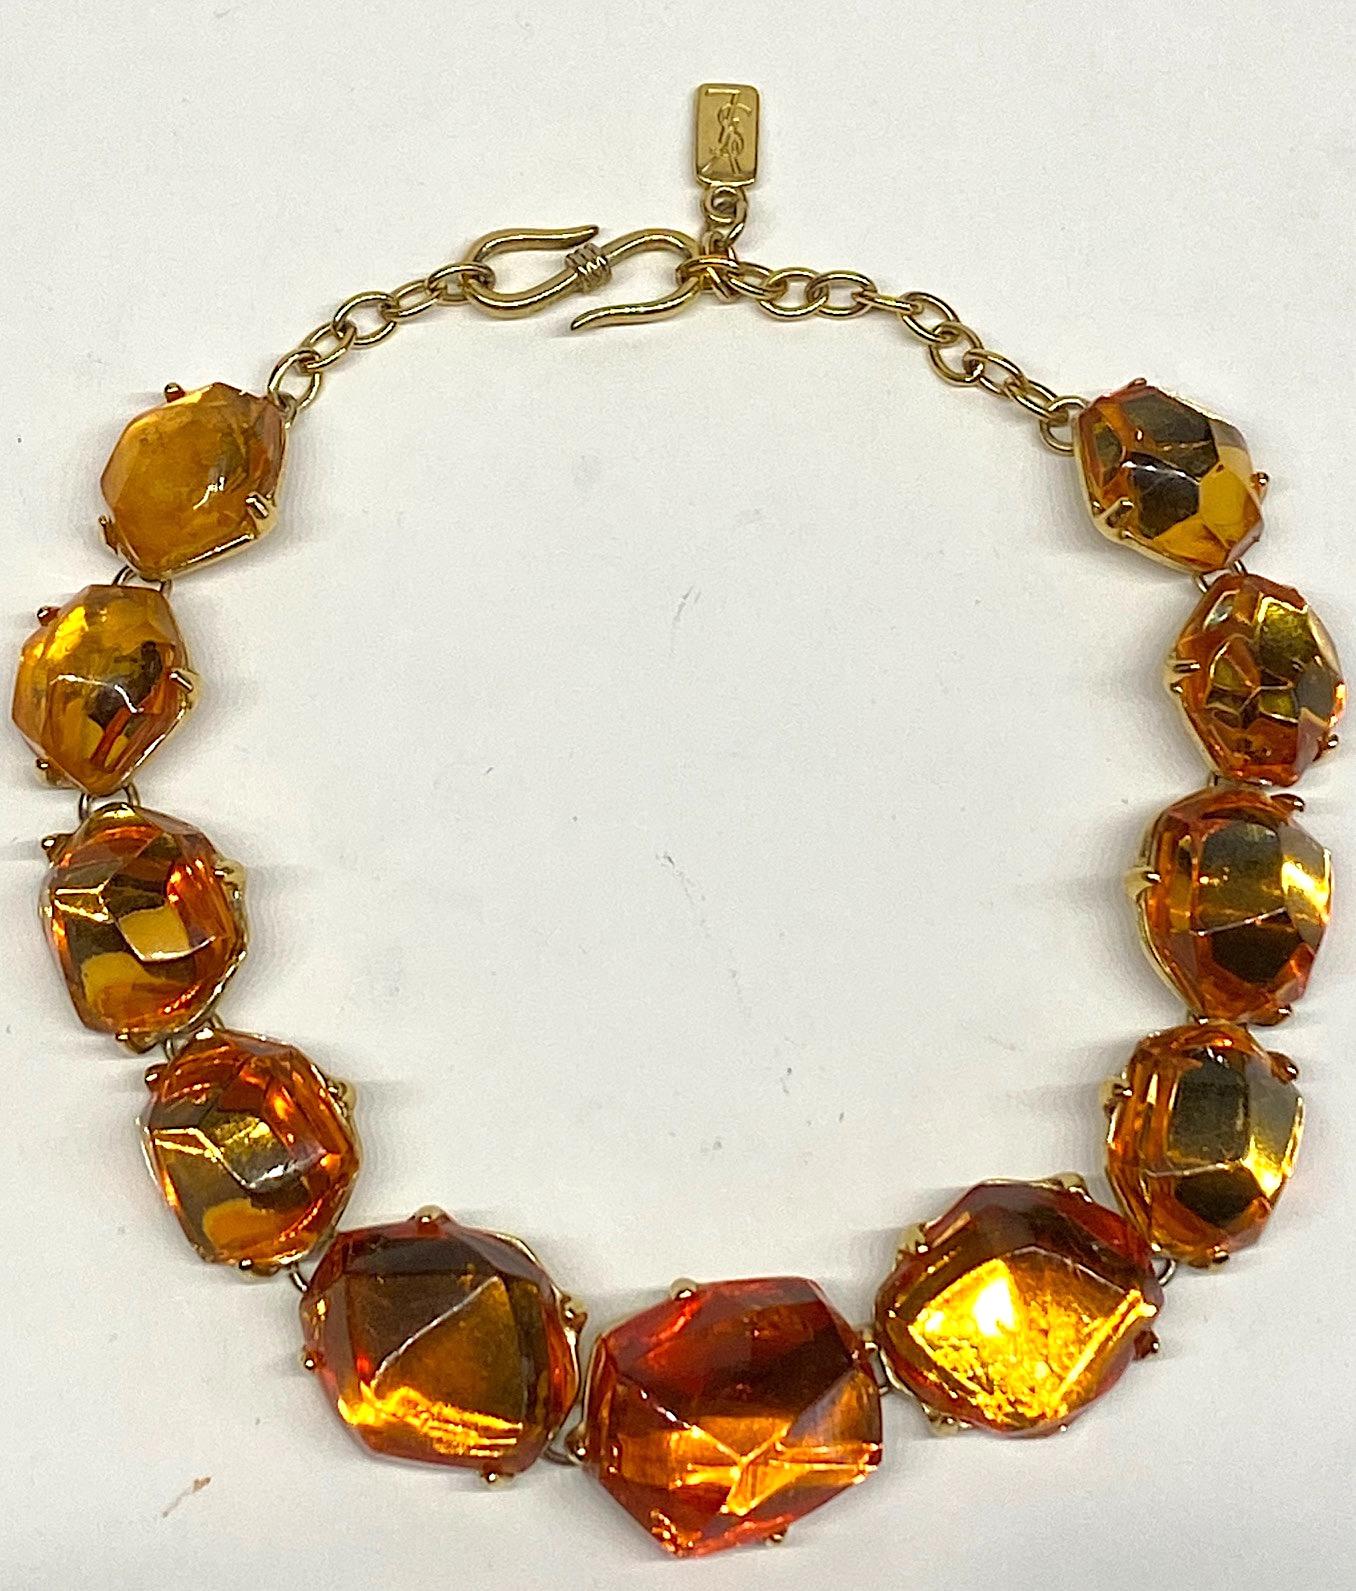 A beautiful 1980s Yves Saint Laurent necklace by famous French designer Robert Goosens. The necklace is comprised of 11 poured and faceted golden honey amber color resin stones. The stones are mounted into gold plate settings and linked together.